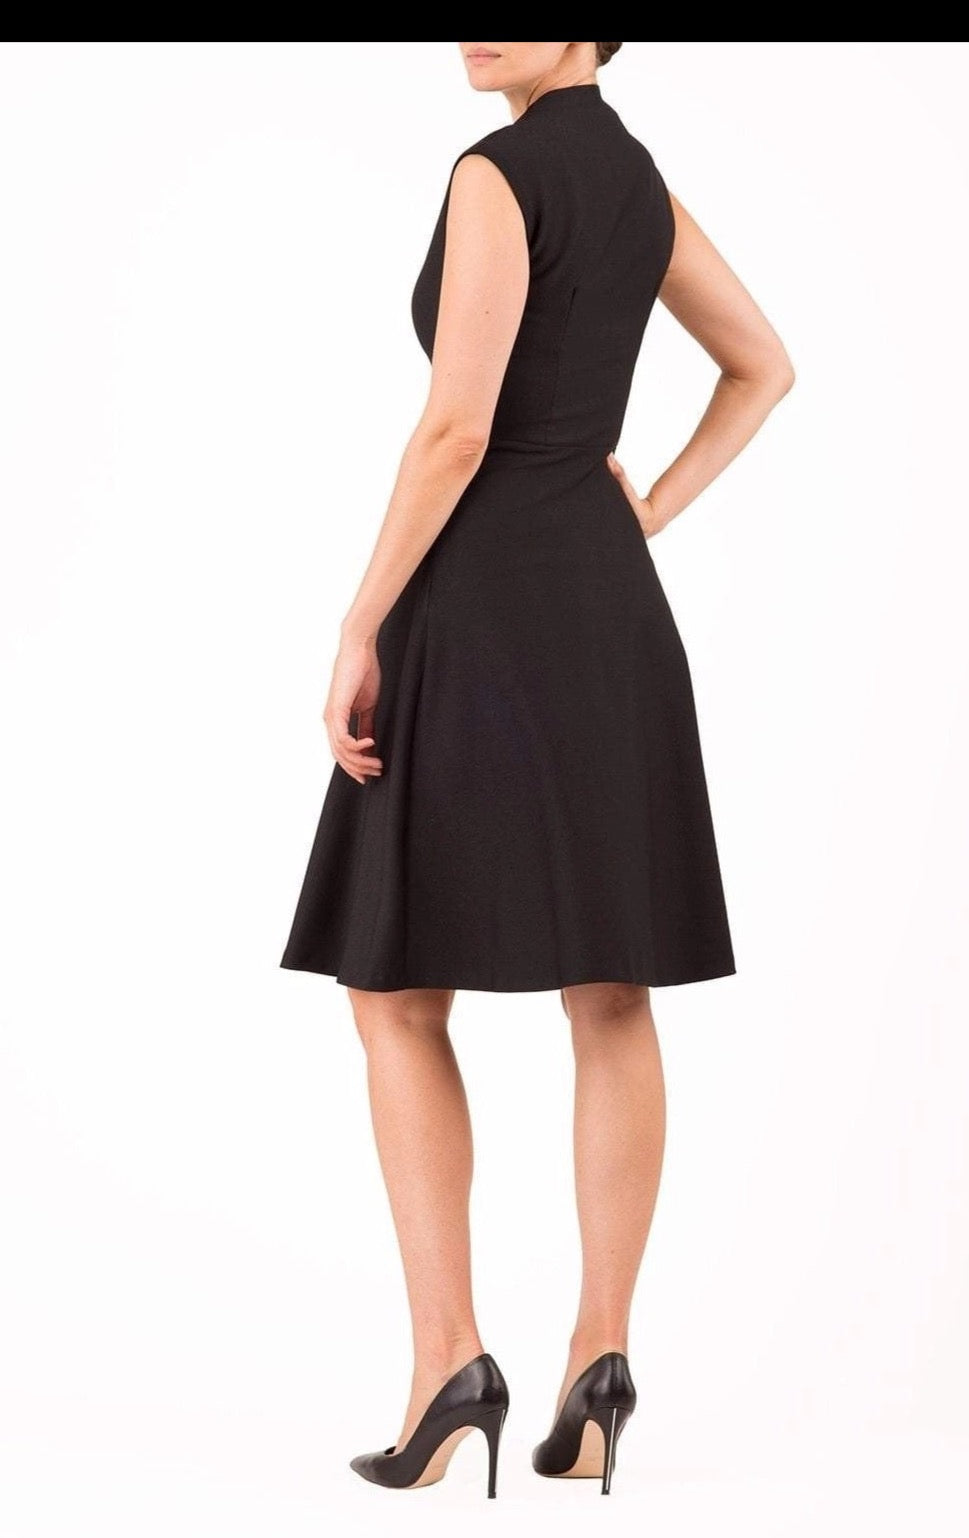 Women' Business Rio Dress - Black NORA GARDNER | OFFICIAL STORE for work and office